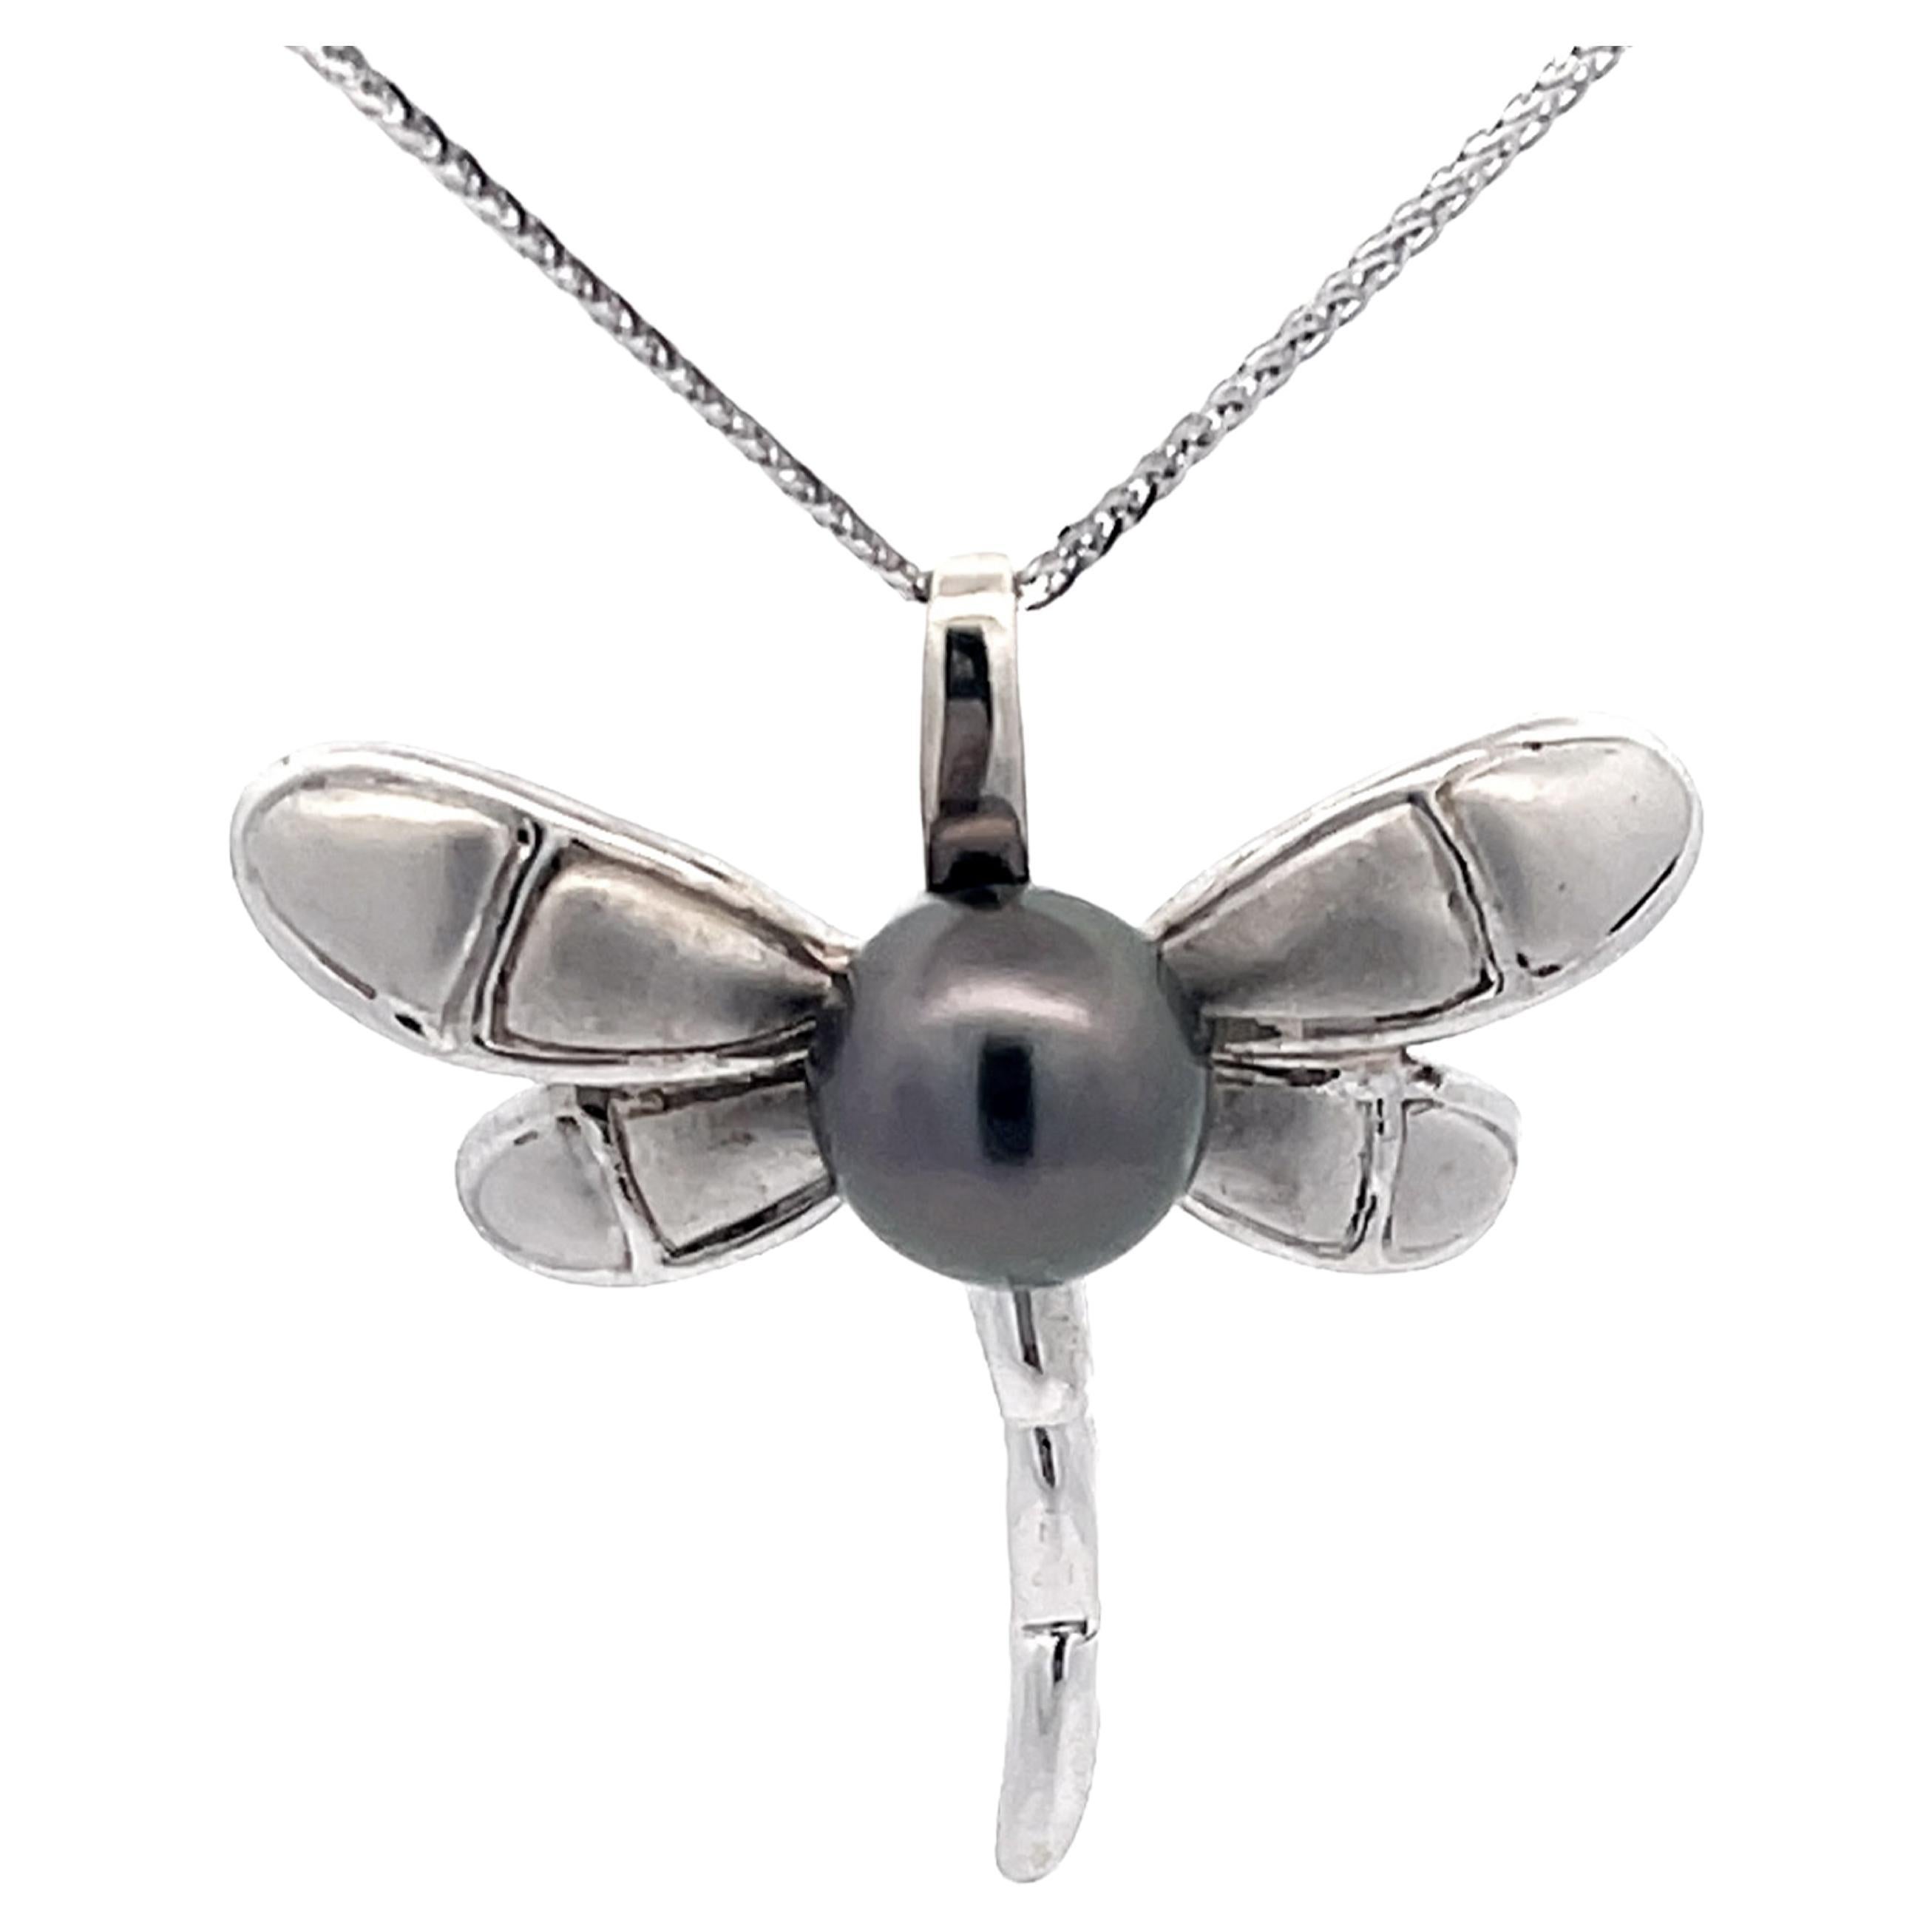 Dragonfly Tahitian Pearl Pendant on Chain in 14k White Gold